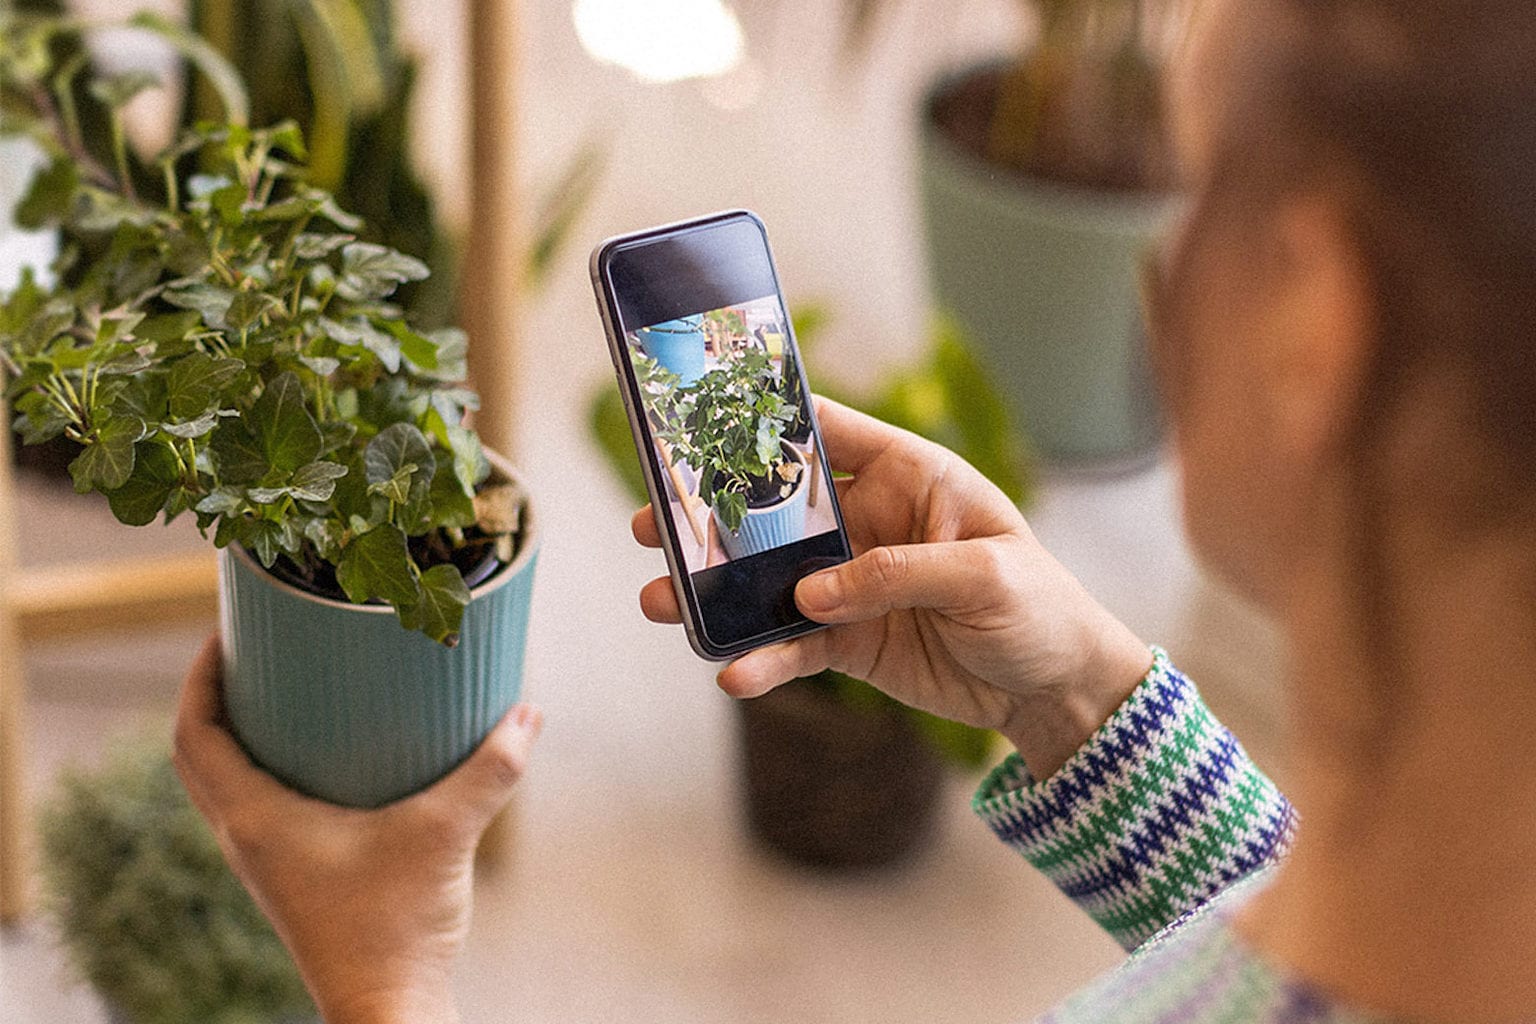 Your iPhone is your ticket to a green thumb with this top-rated gardening and nature identification app.